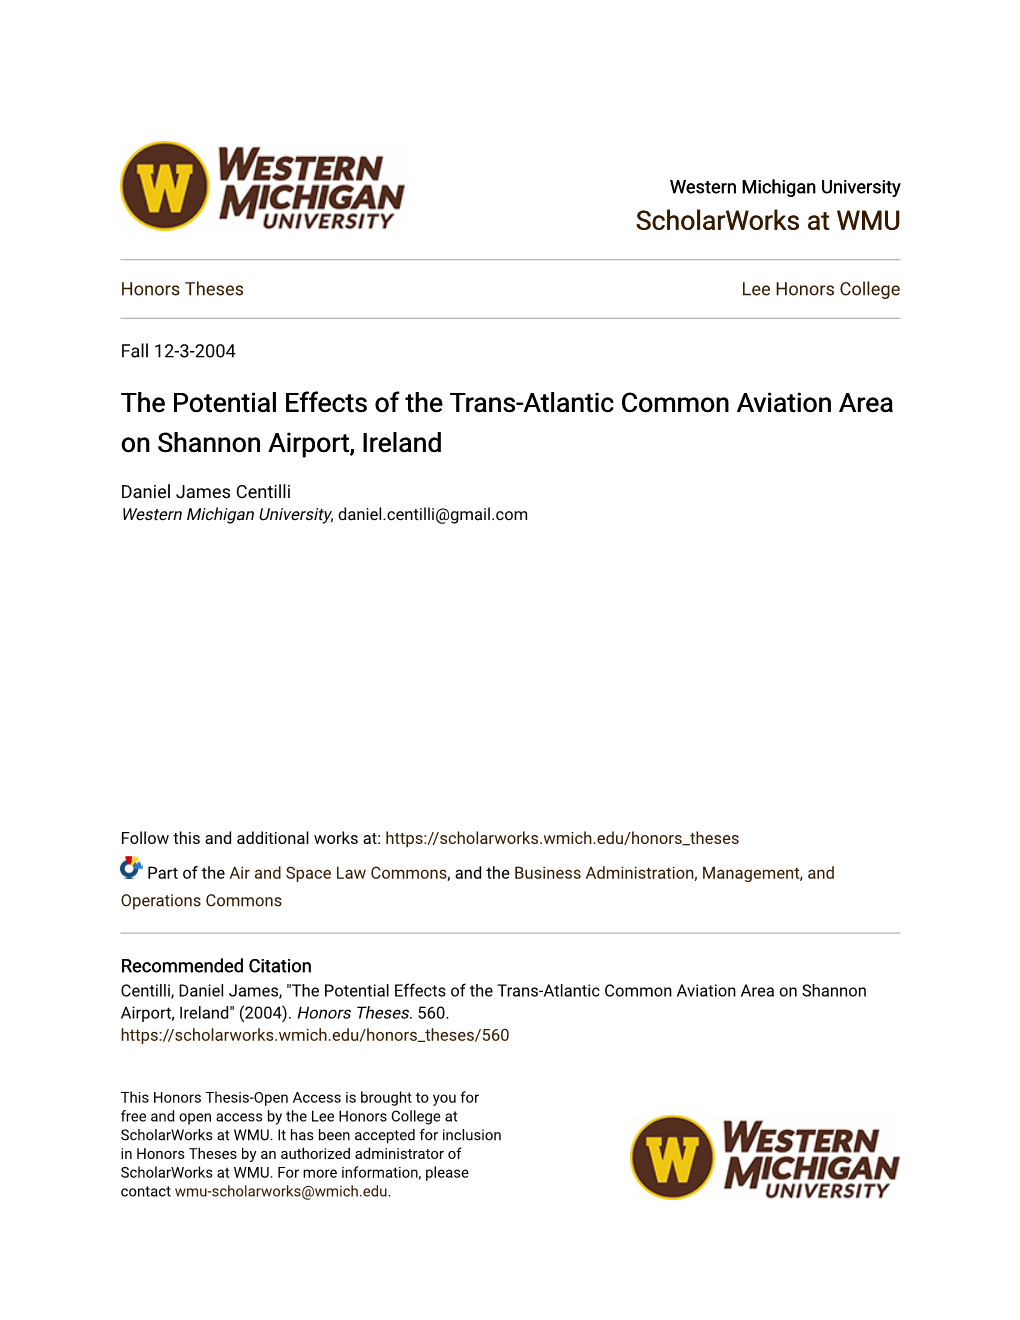 The Potential Effects of the Trans-Atlantic Common Aviation Area on Shannon Airport, Ireland